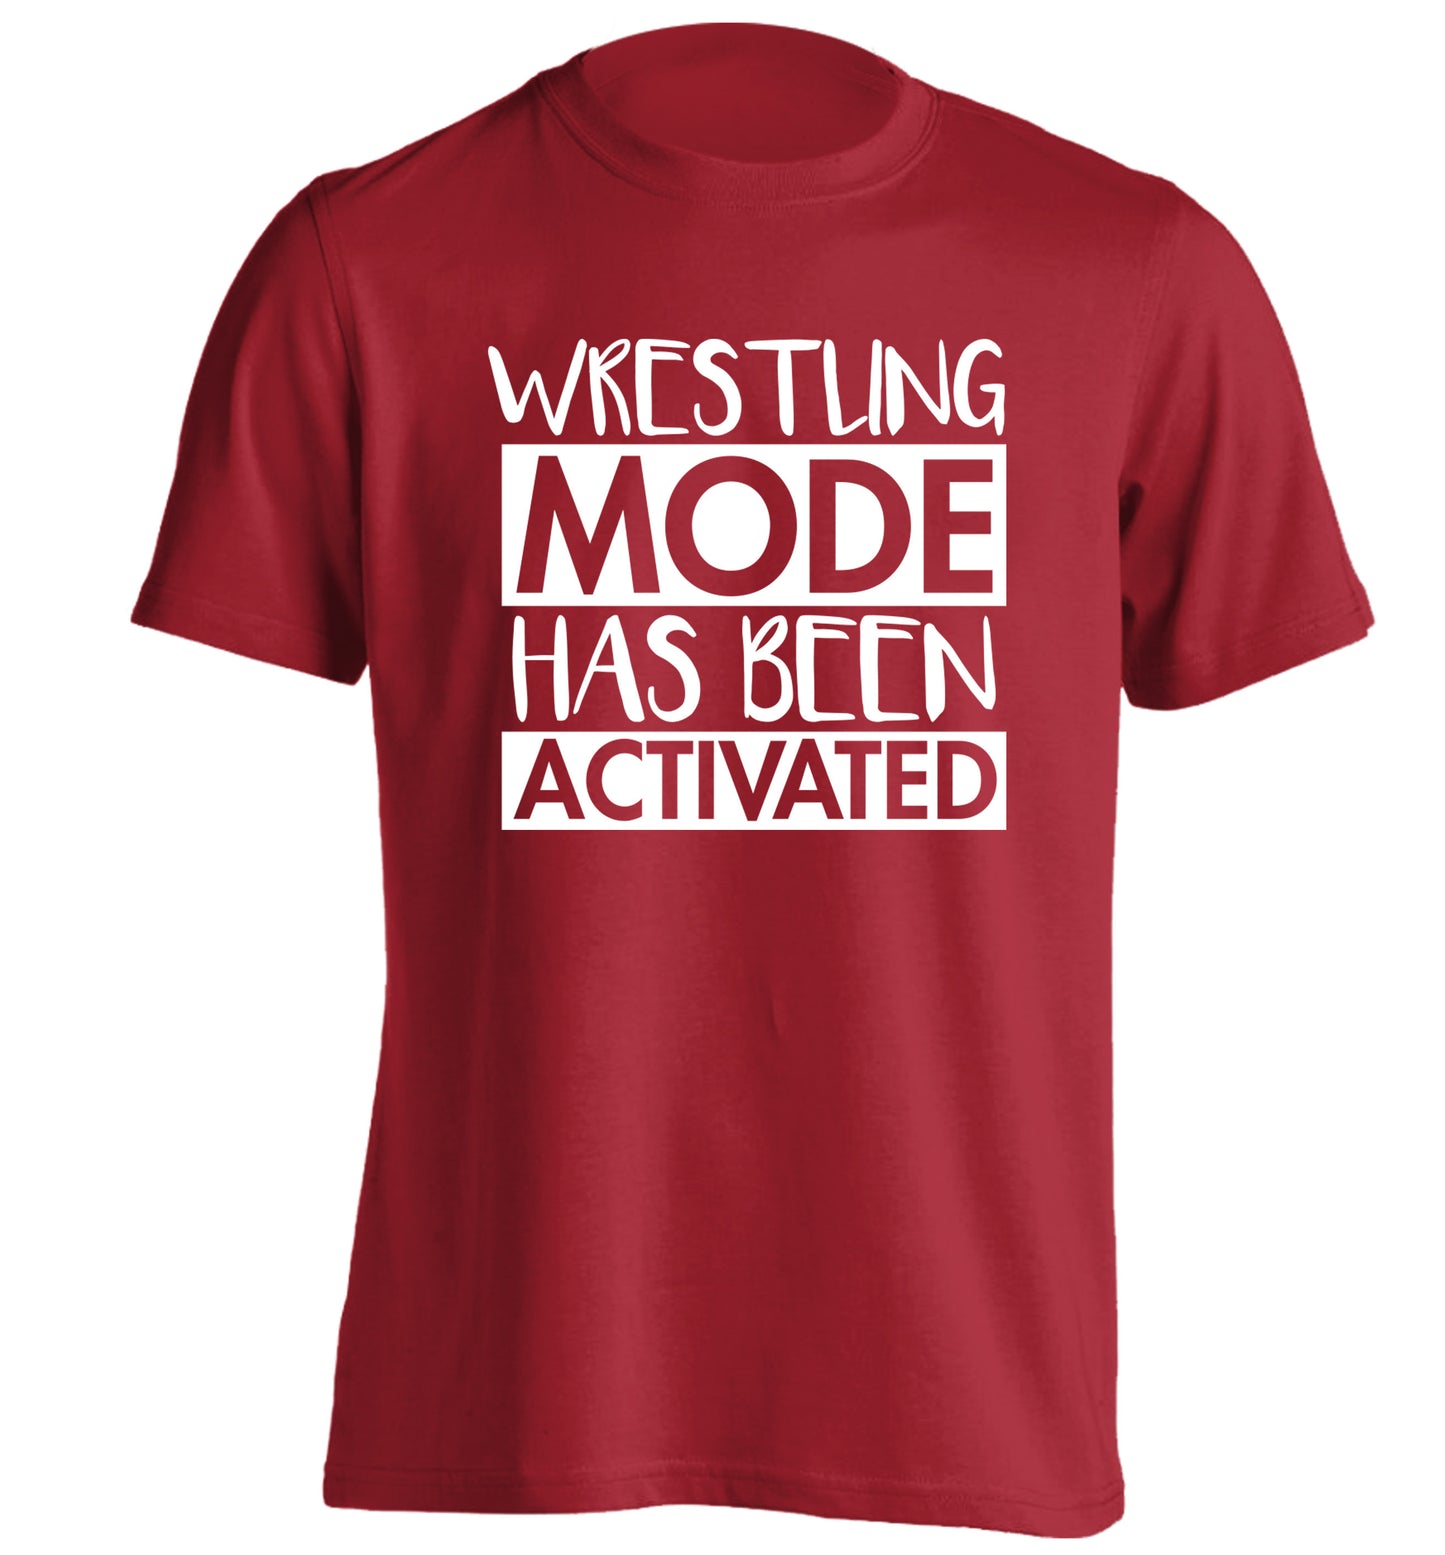 Wresting mode activated adults unisex red Tshirt 2XL